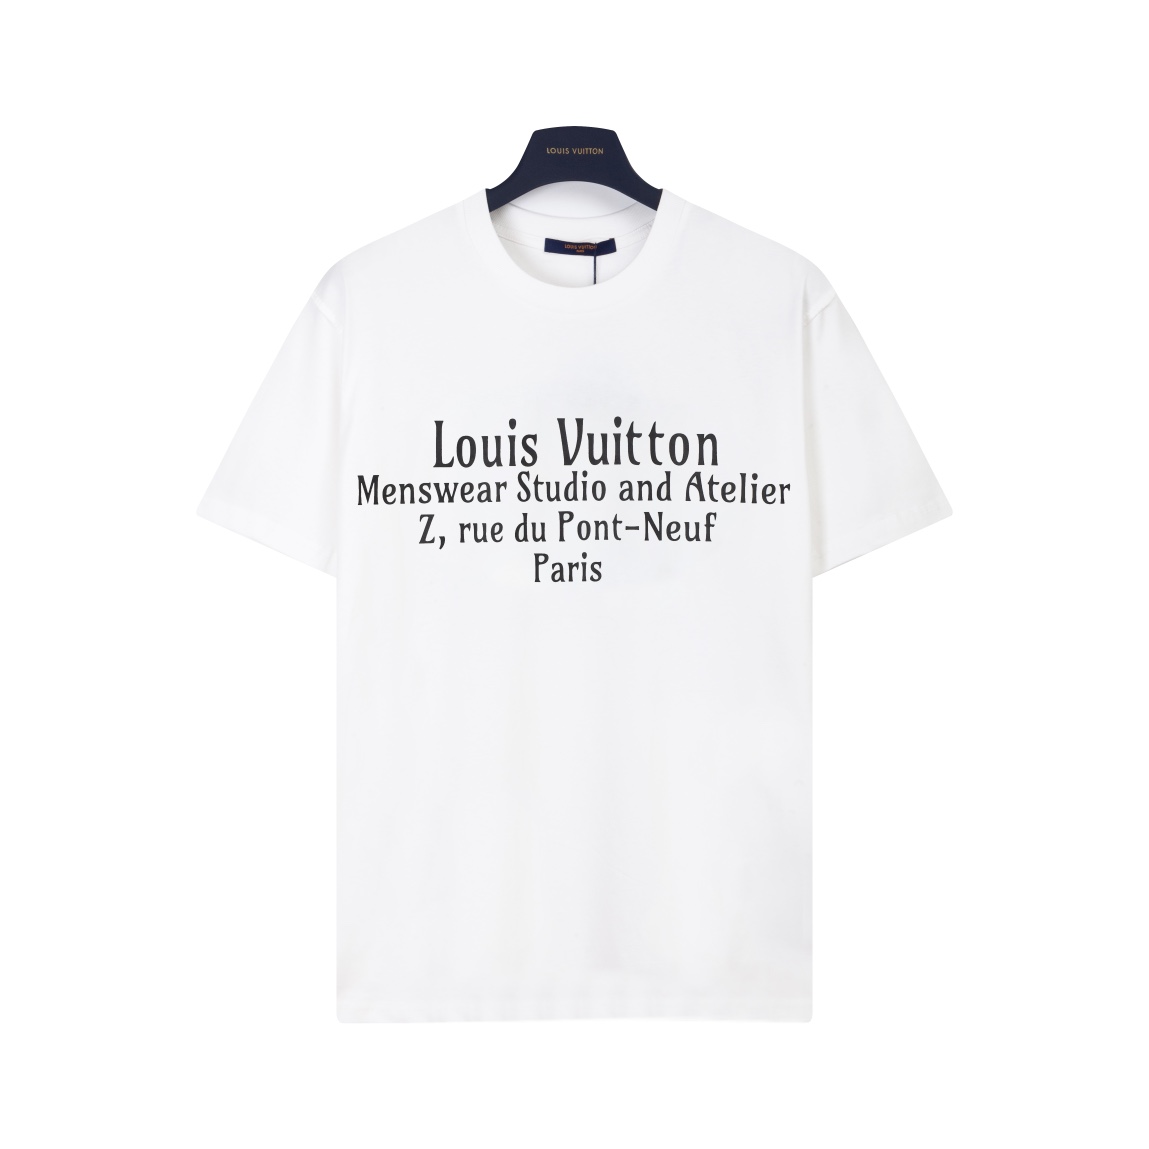 Styles & Where to Buy
 Louis Vuitton Shop
 Clothing T-Shirt White Printing Unisex Cotton Spring/Summer Collection Short Sleeve